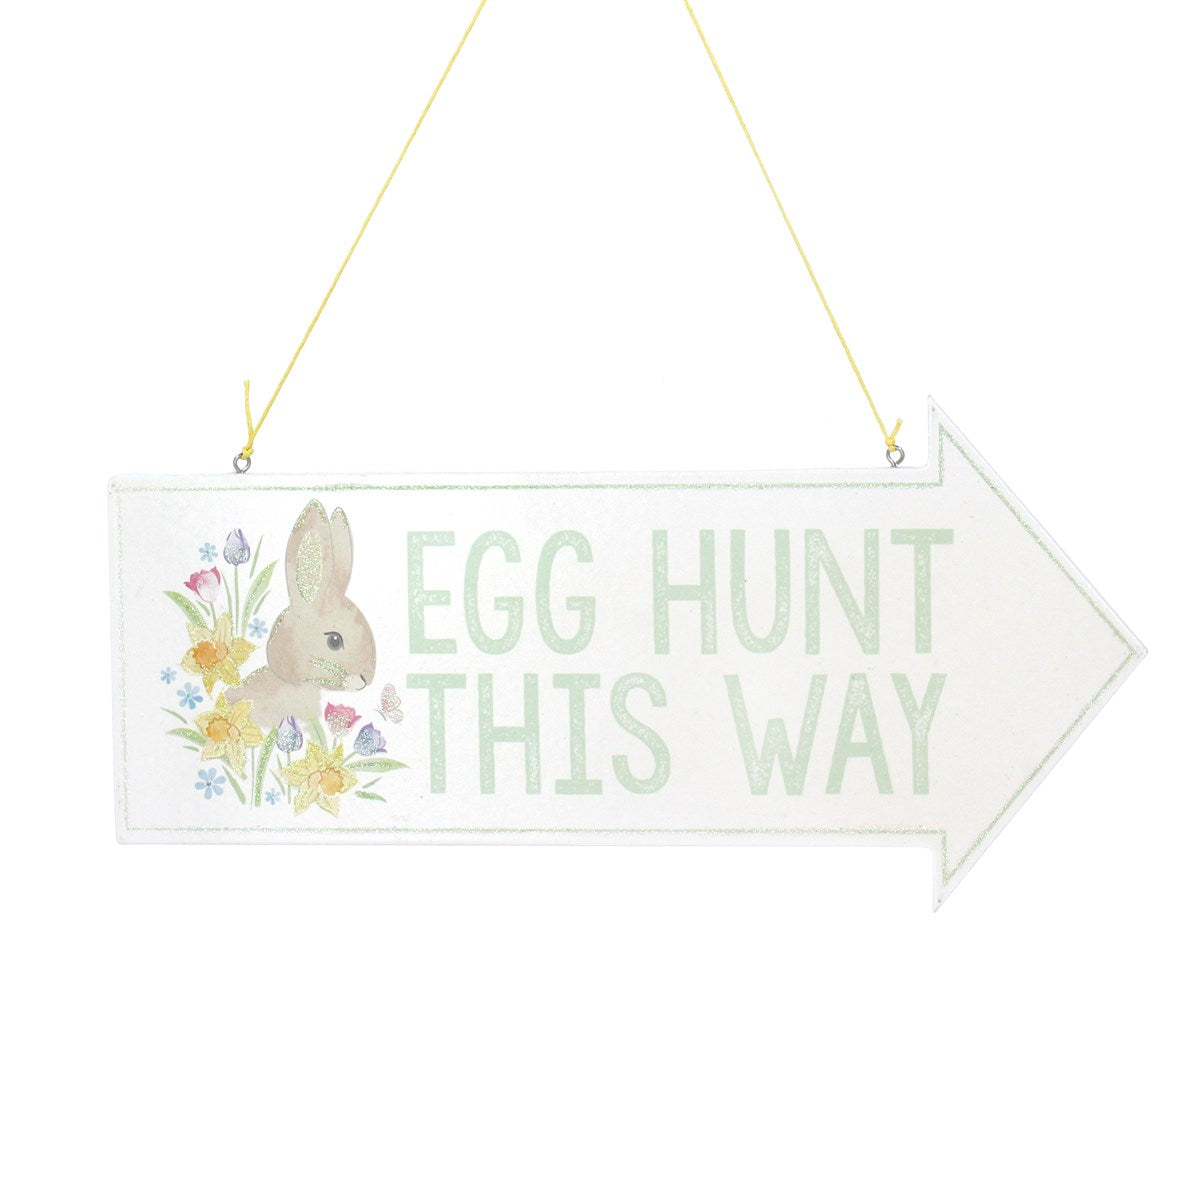 'This Way' Easter egg hunt sign